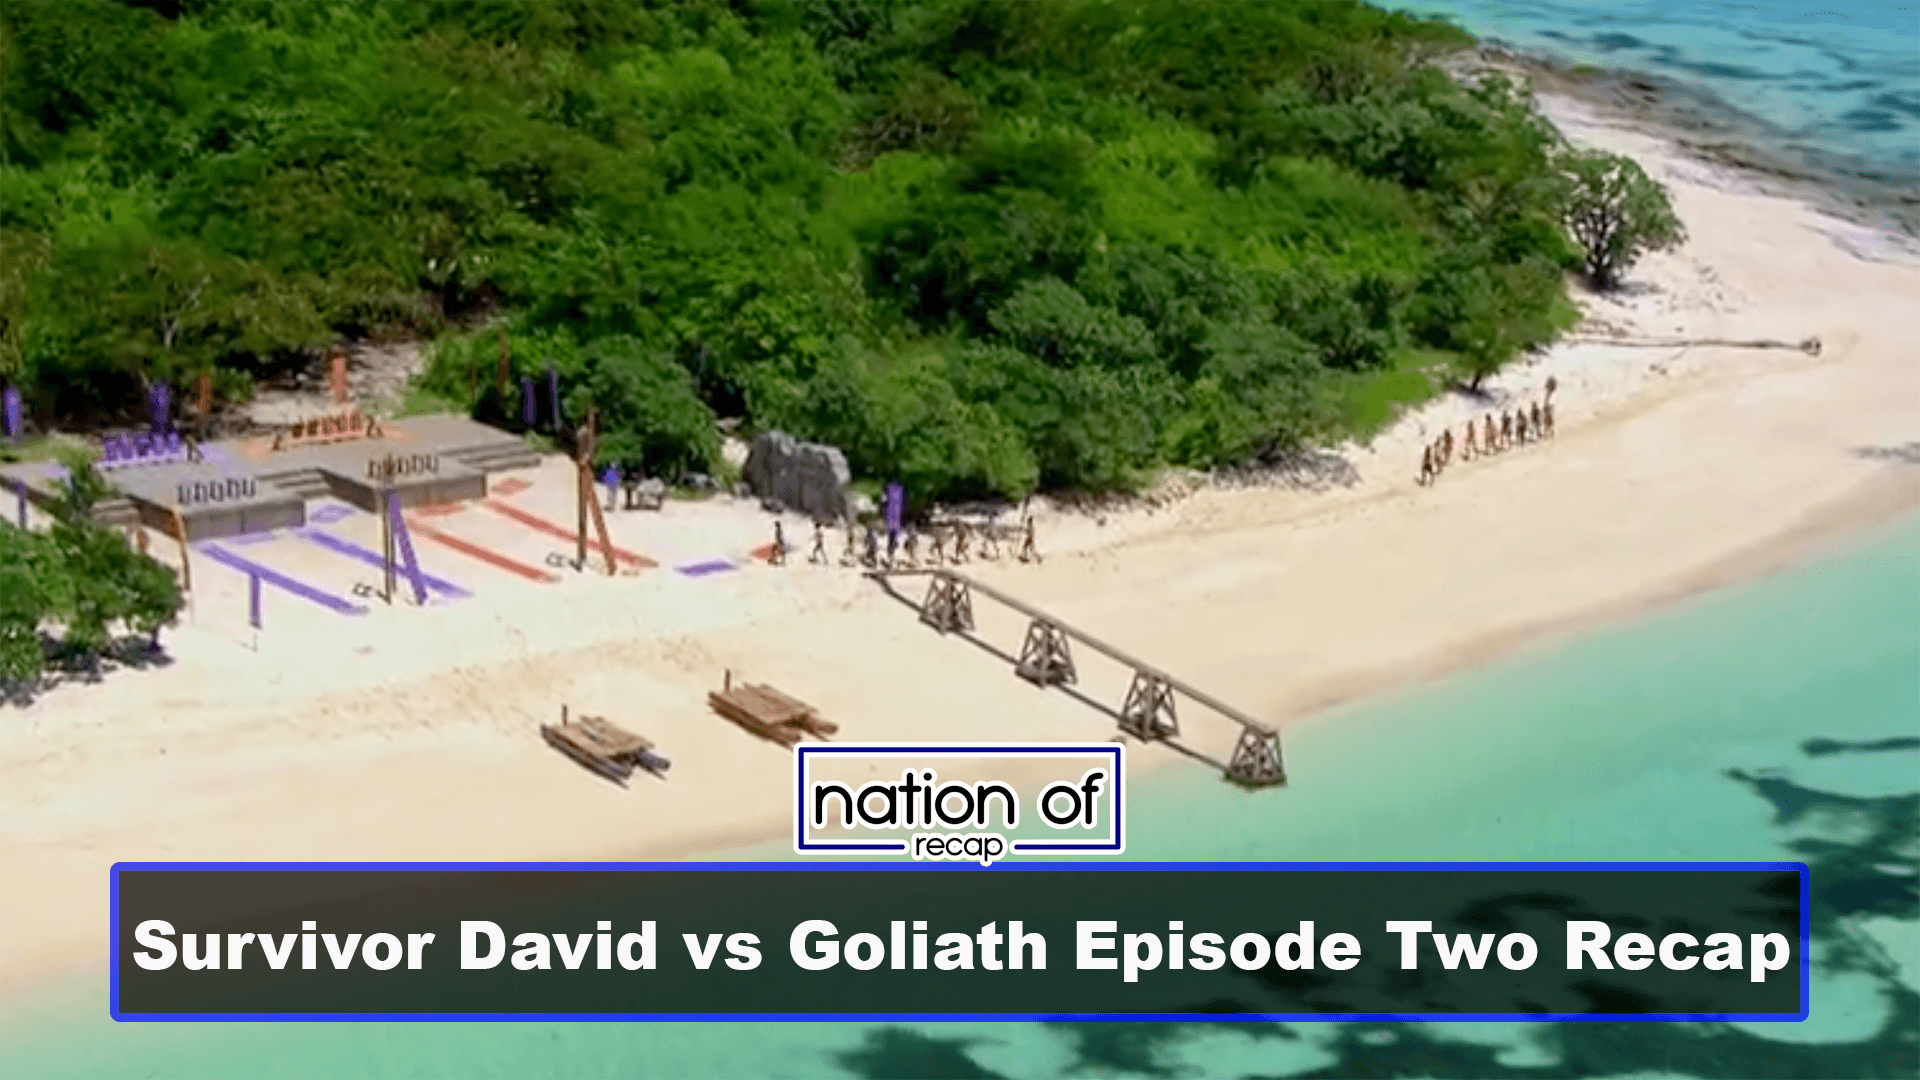 On this episode of Nation of Recap, Jordan and Tyler return to the program to break down all the action from Survivor David vs Goliath Episode Two.